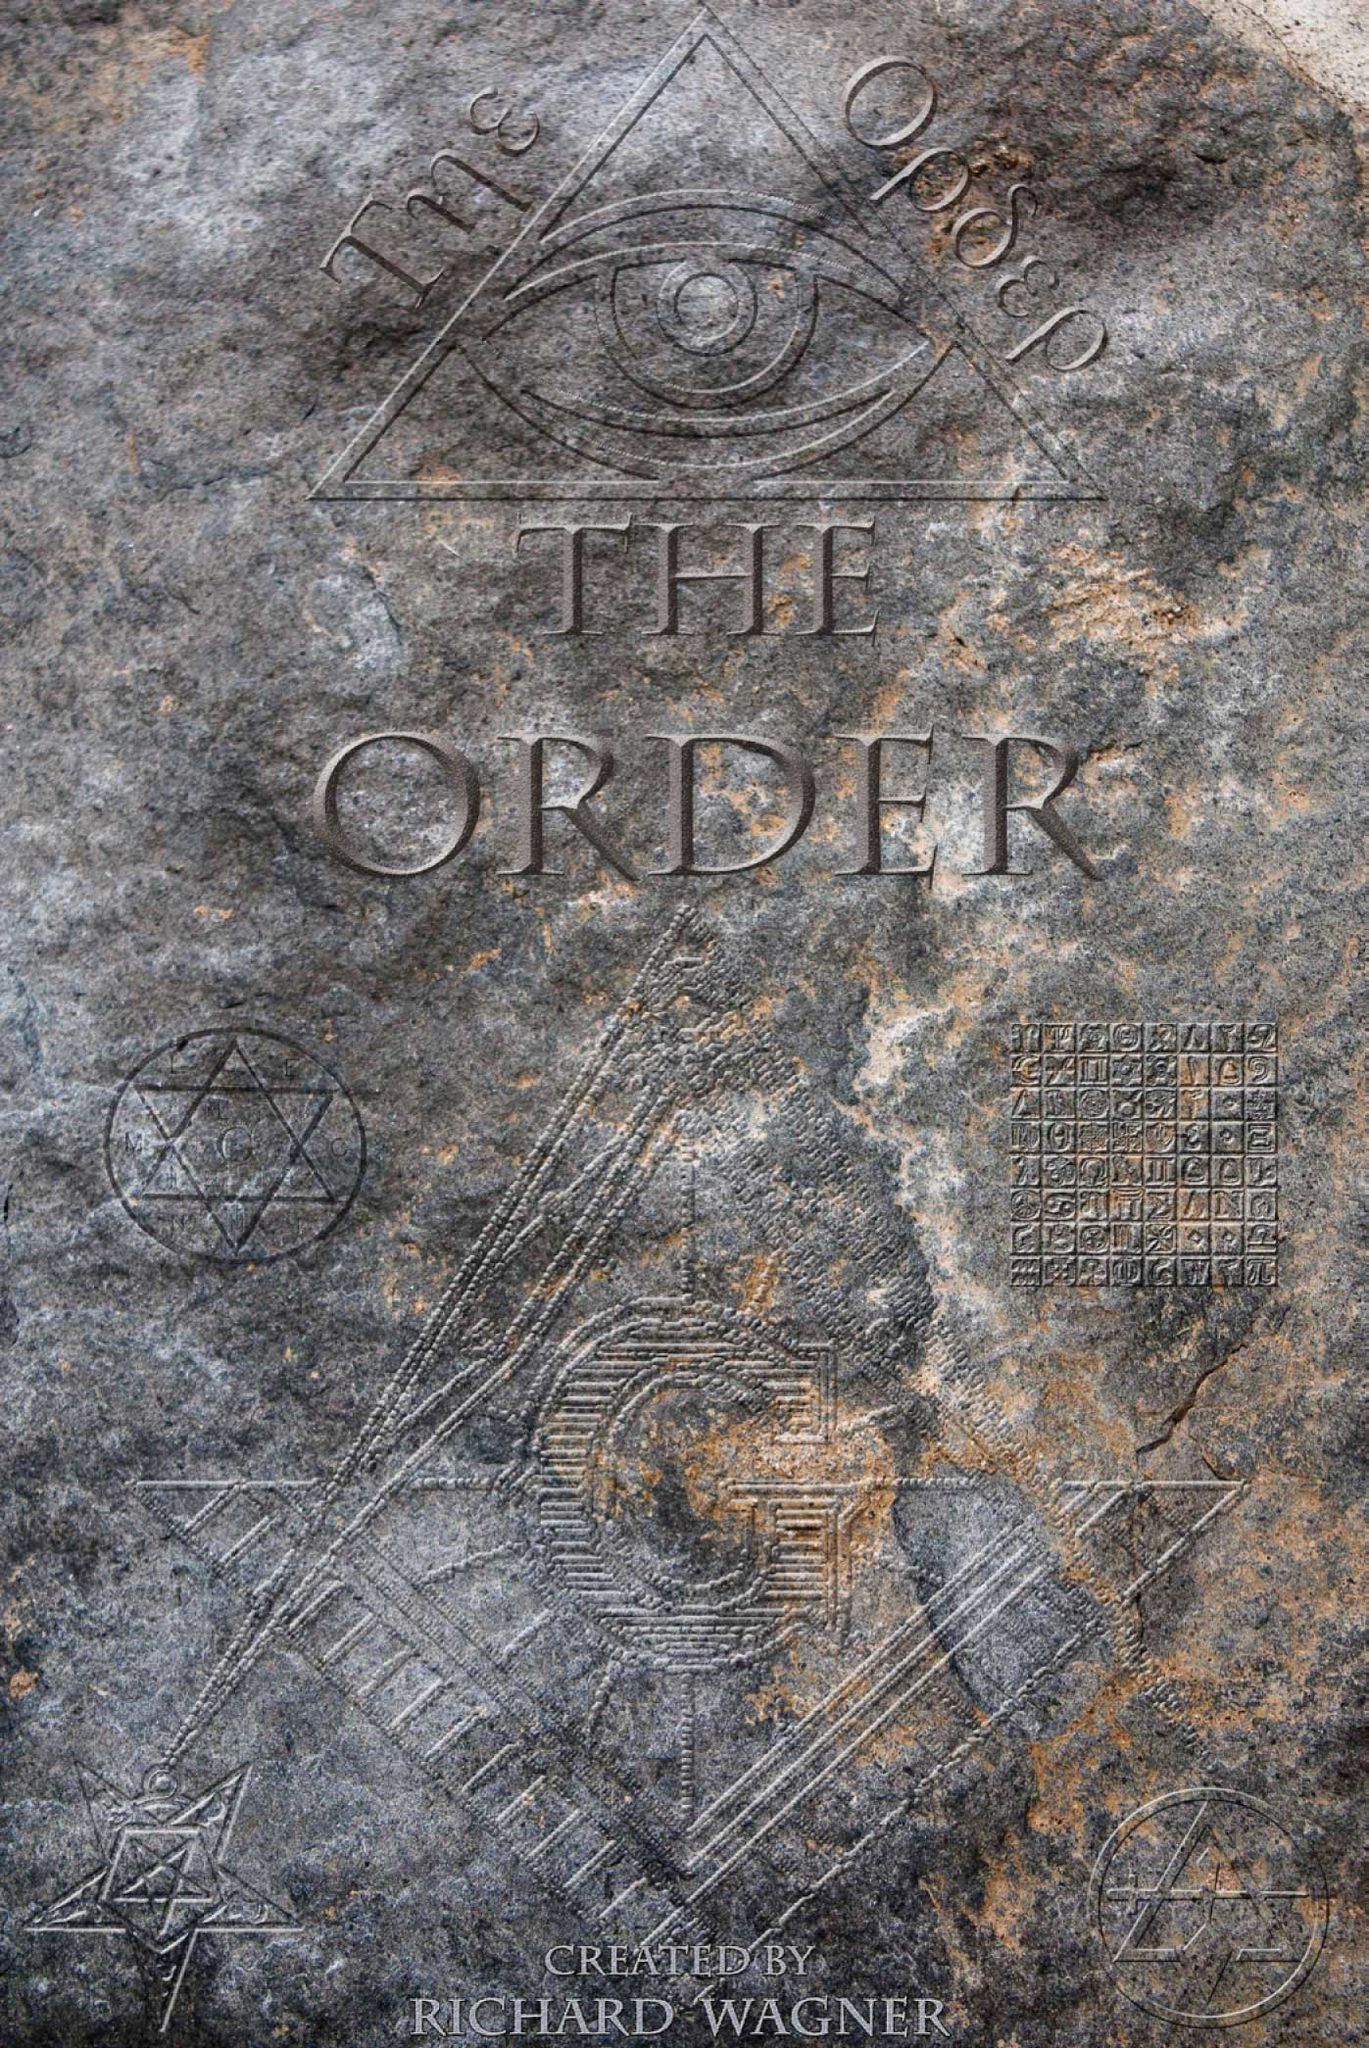 THE ORDER